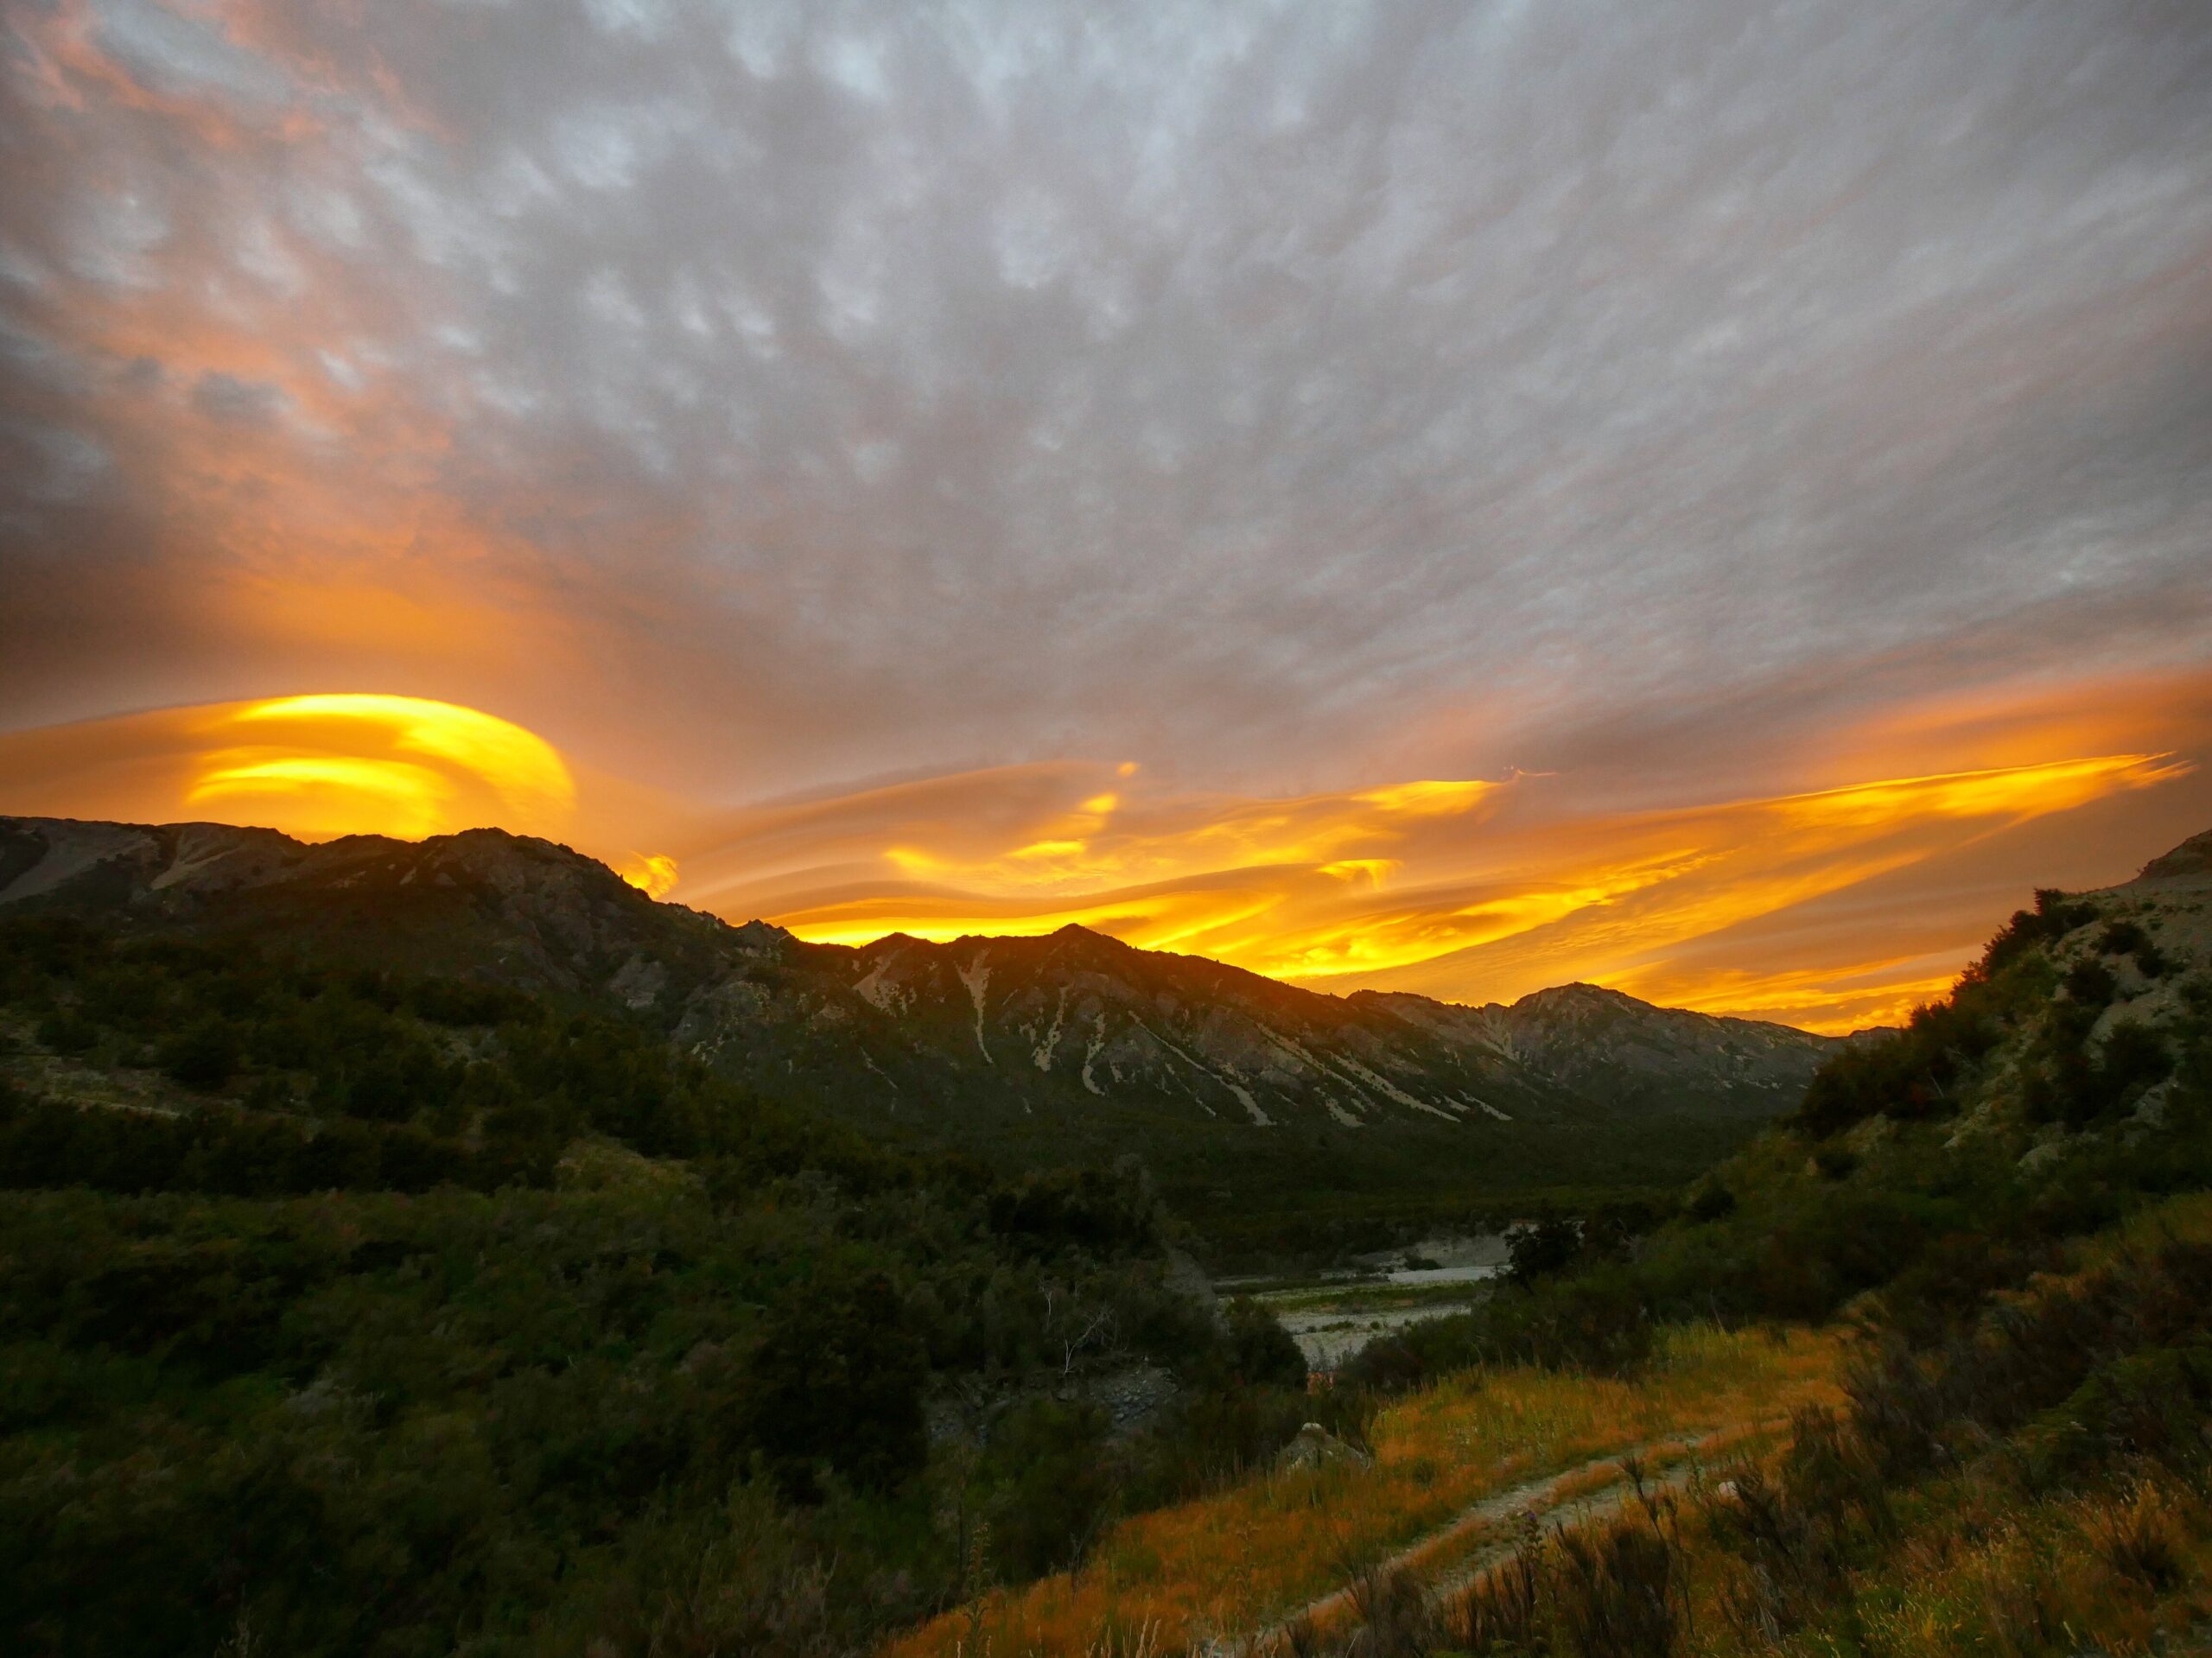 The sun rises over the Waiau River valley.